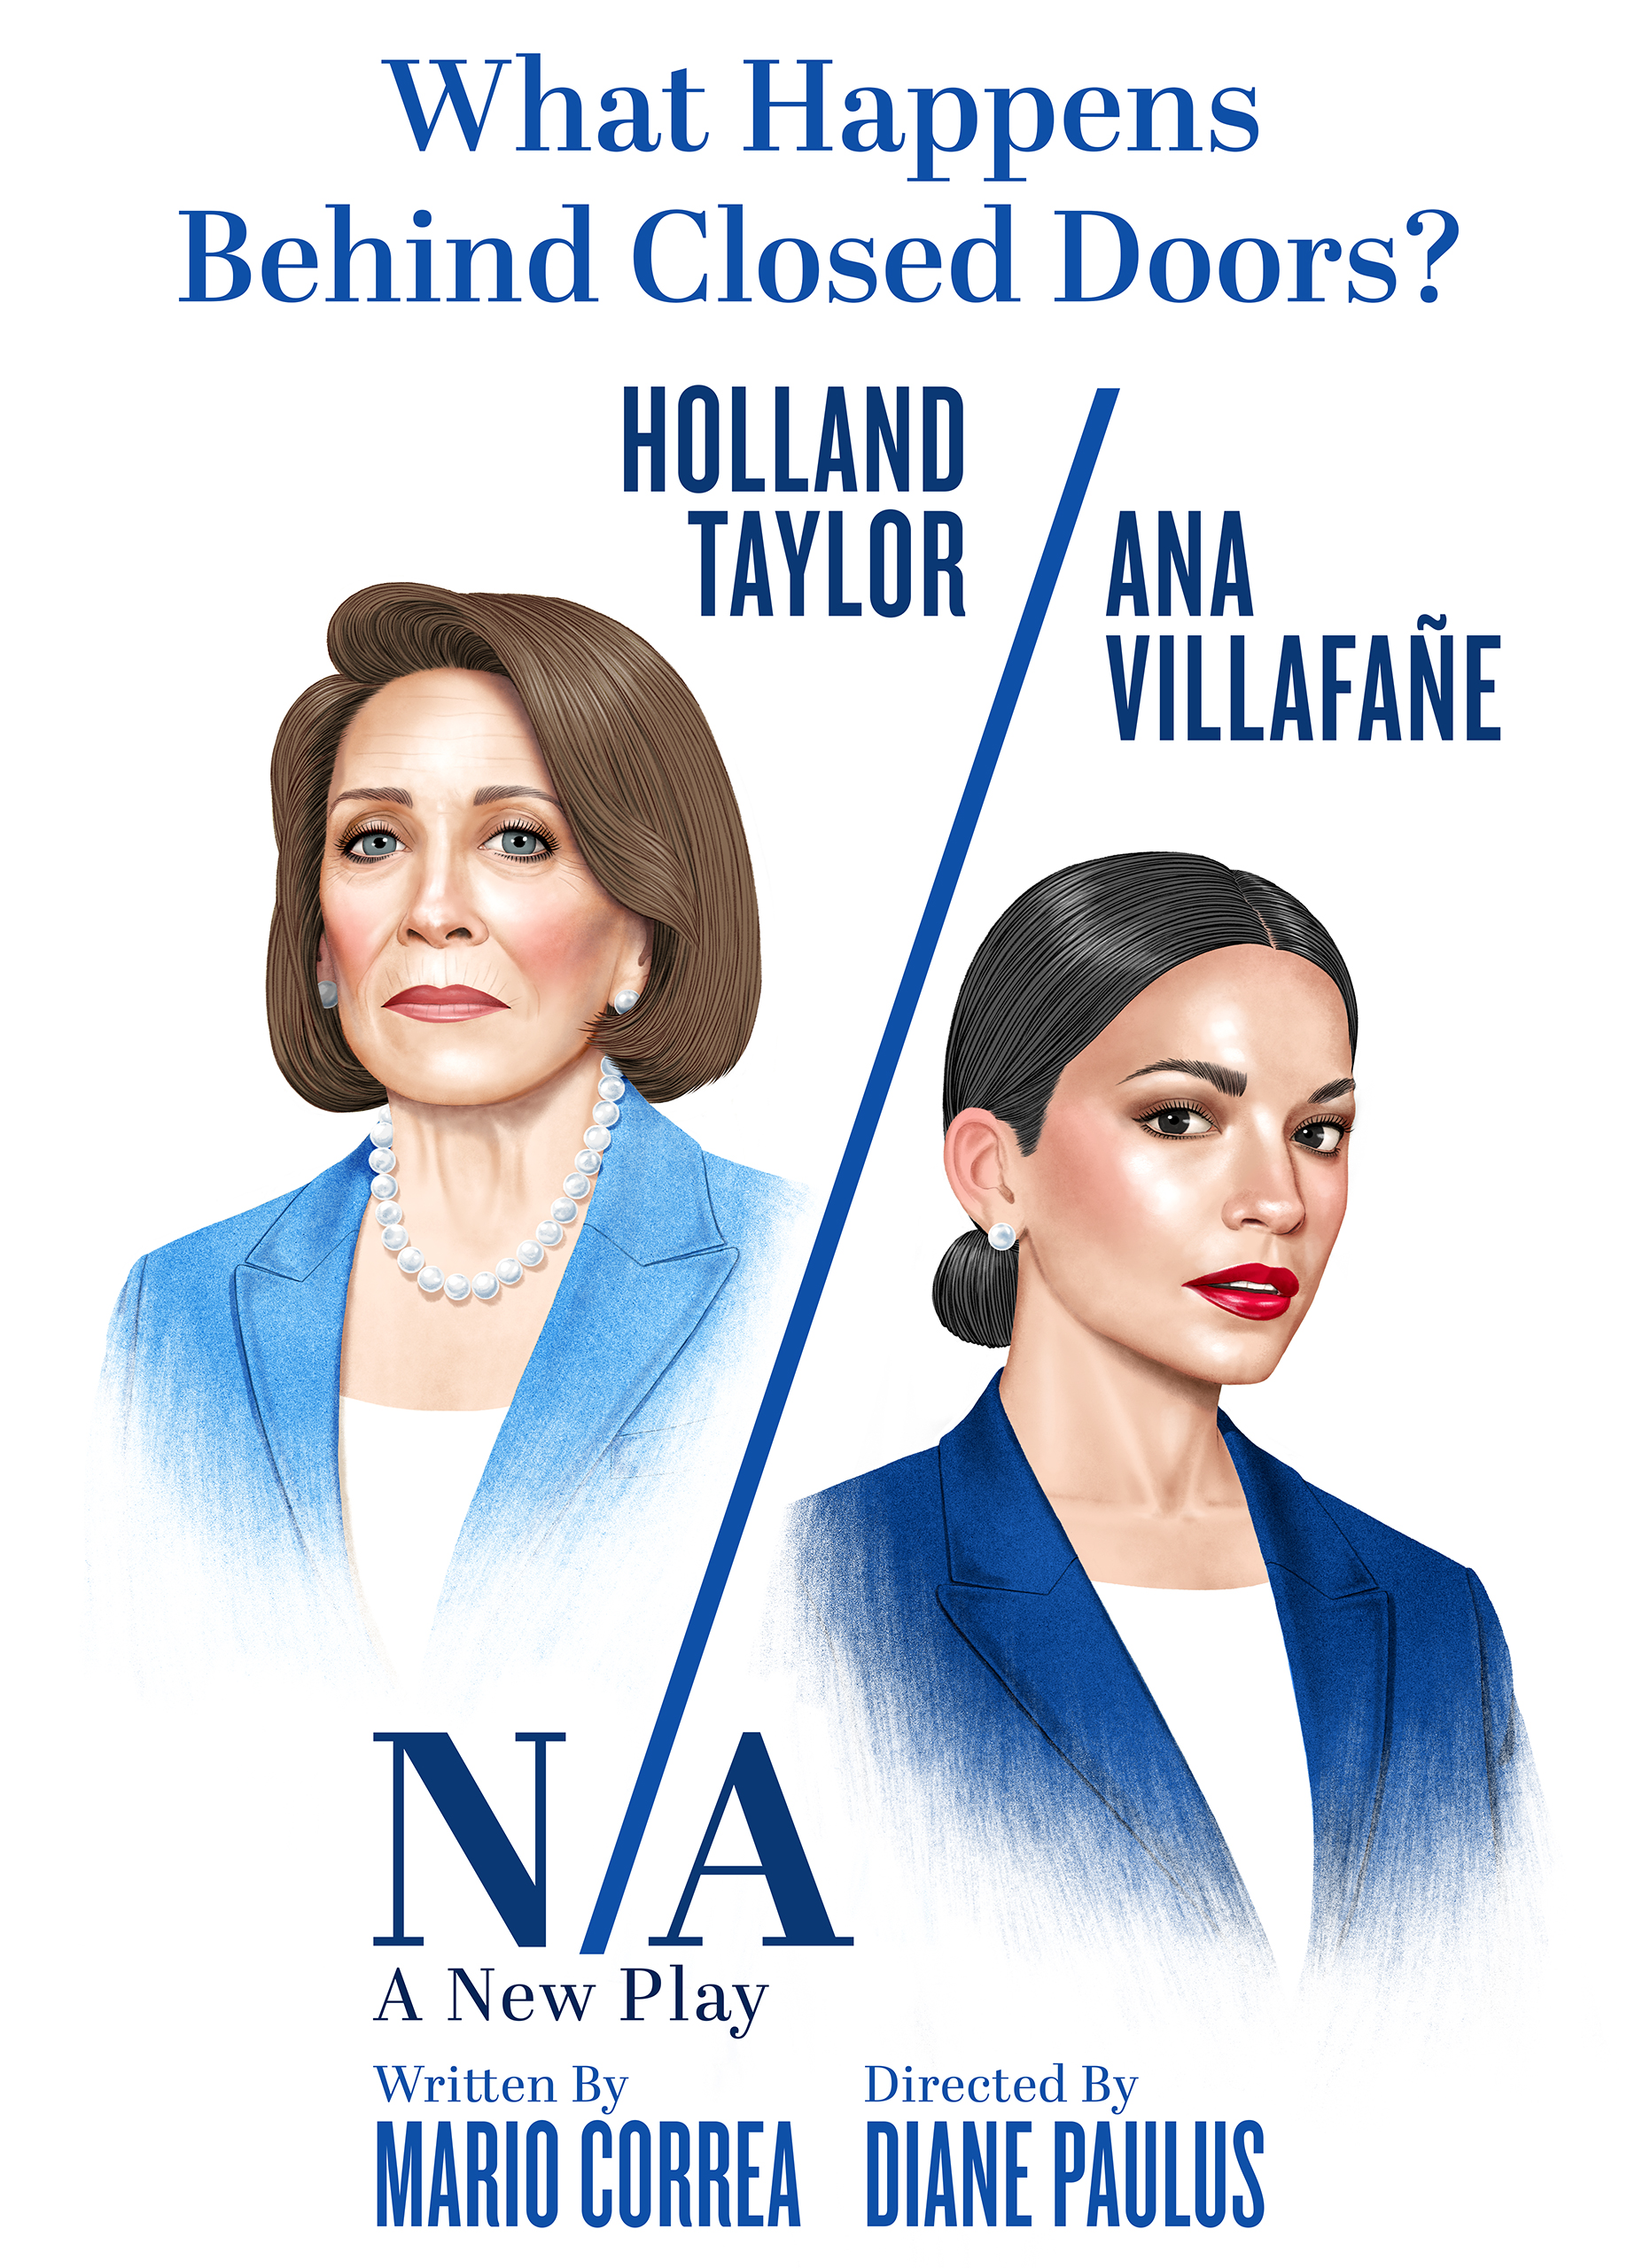 Holland Taylor & Ana Villafañe to star in N/A at the Newhouse this summer